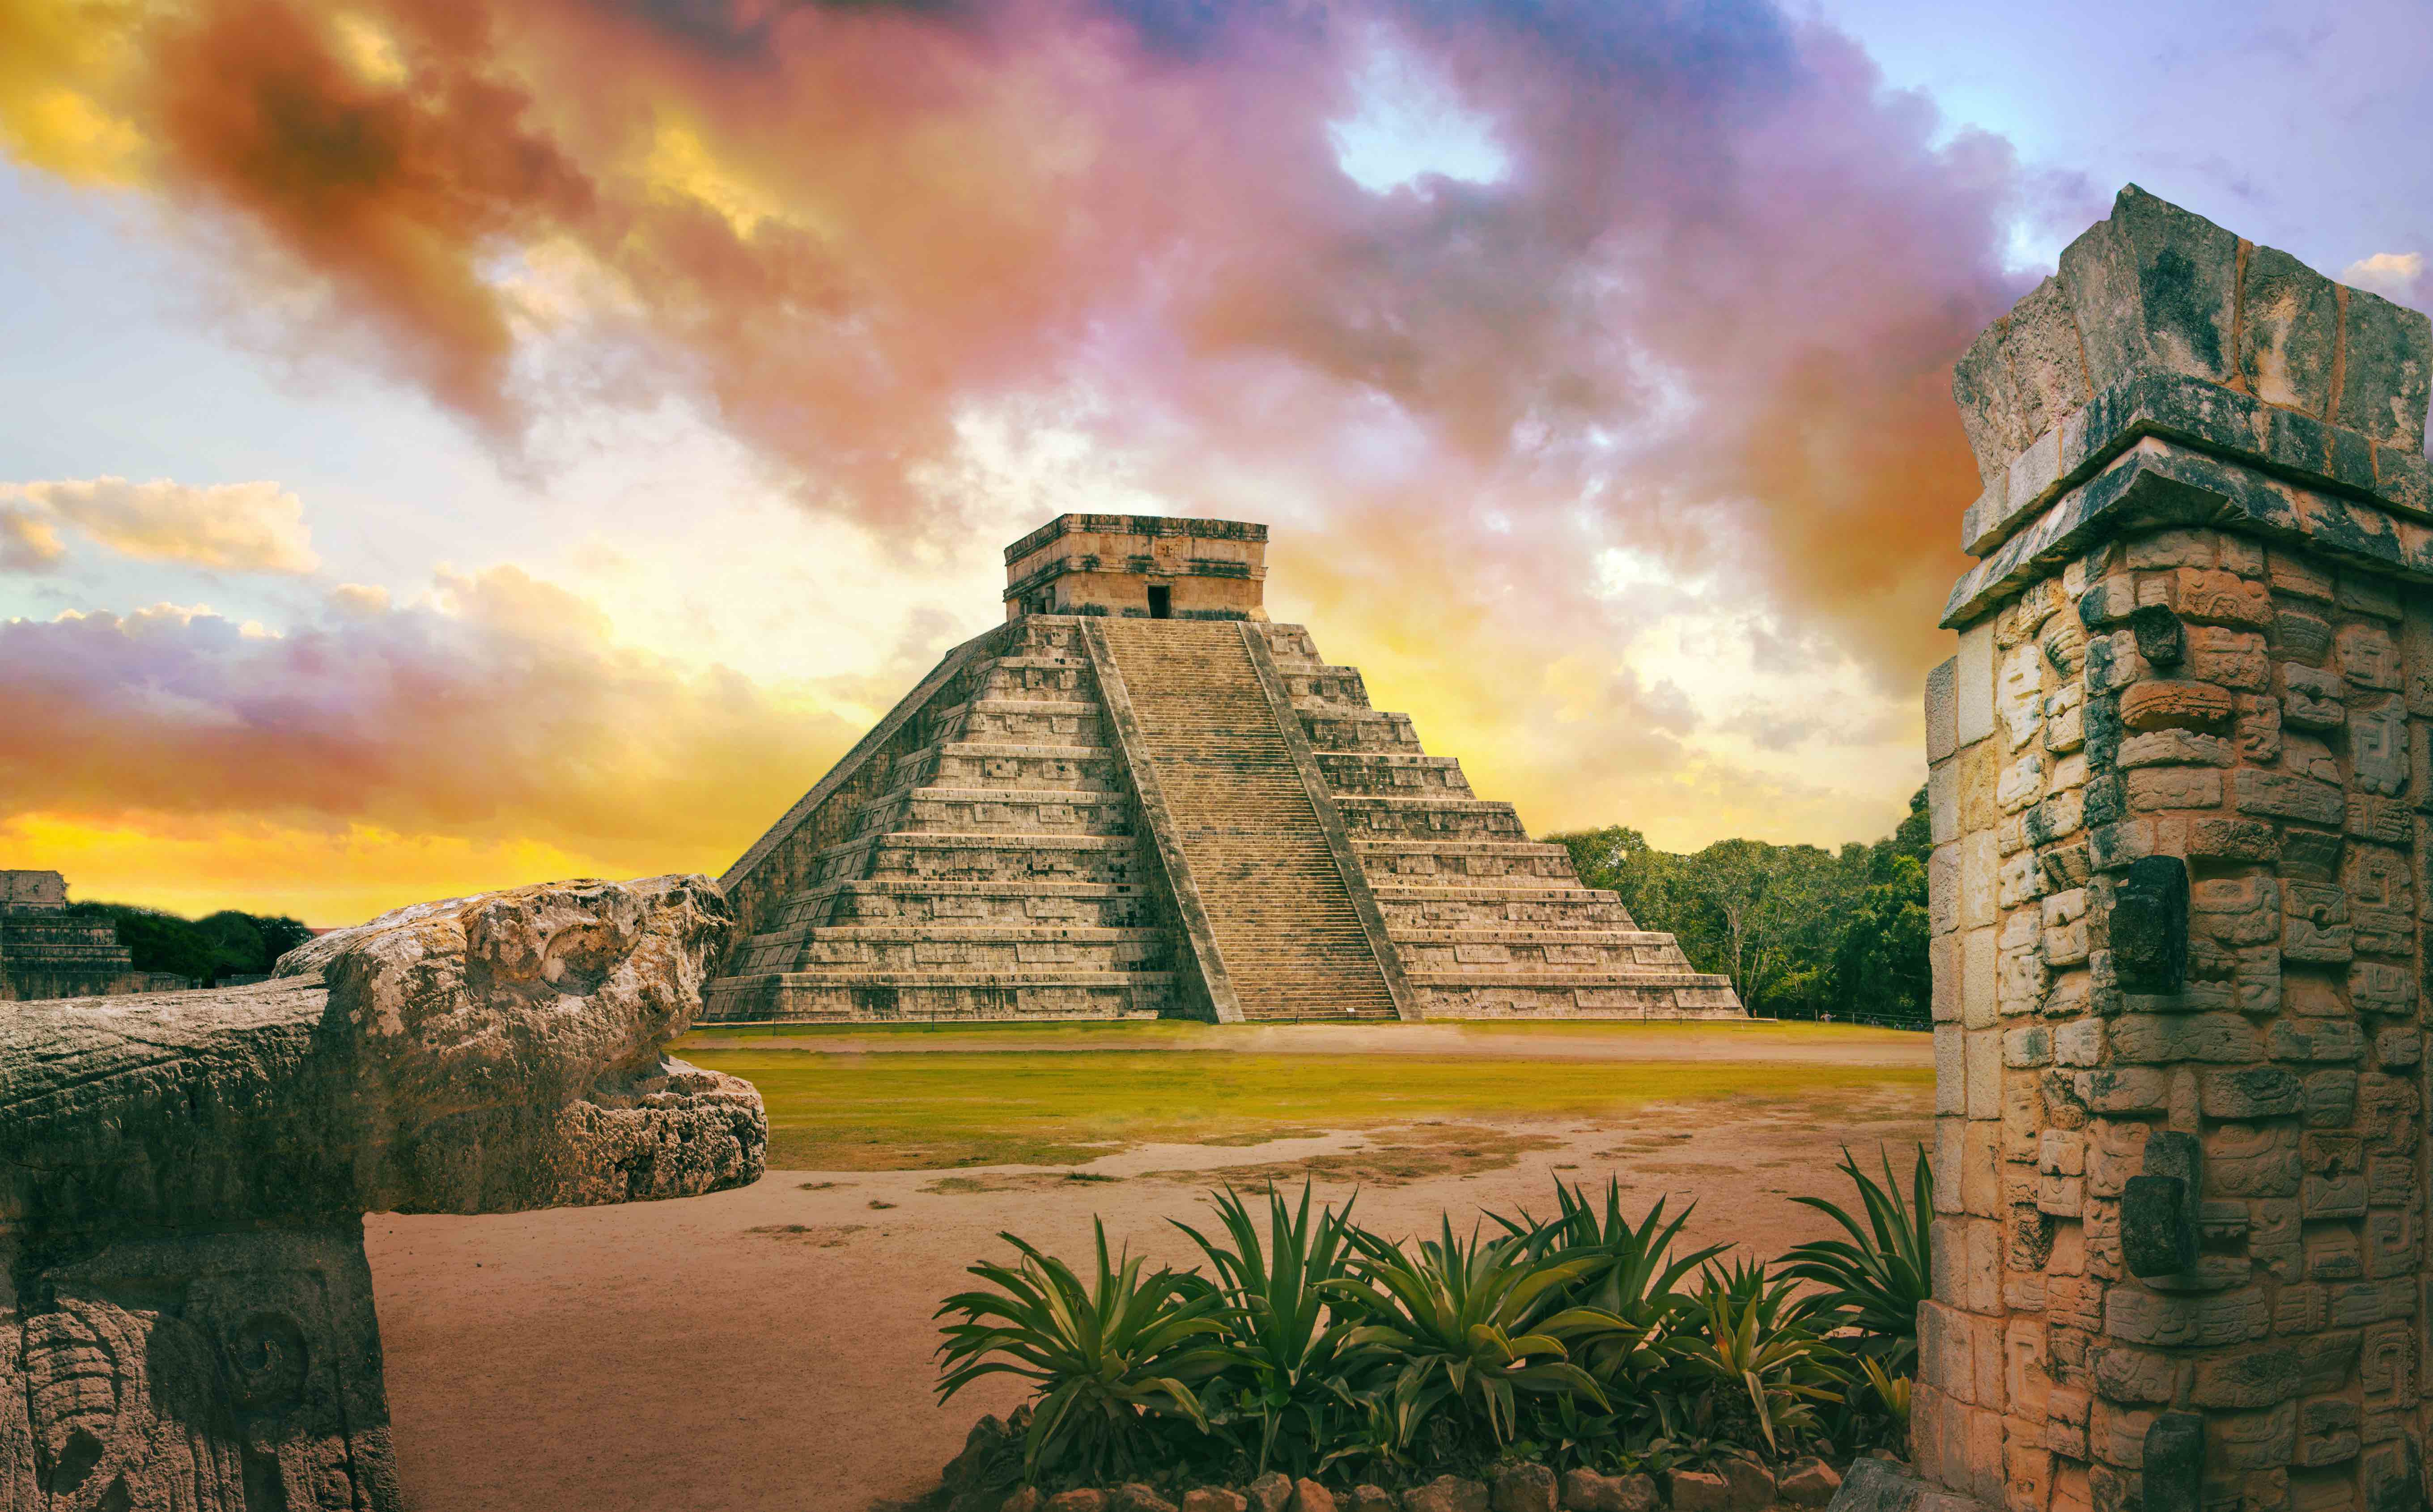 40 Chichen Itza Facts The Great Mayan City of the Yucatan